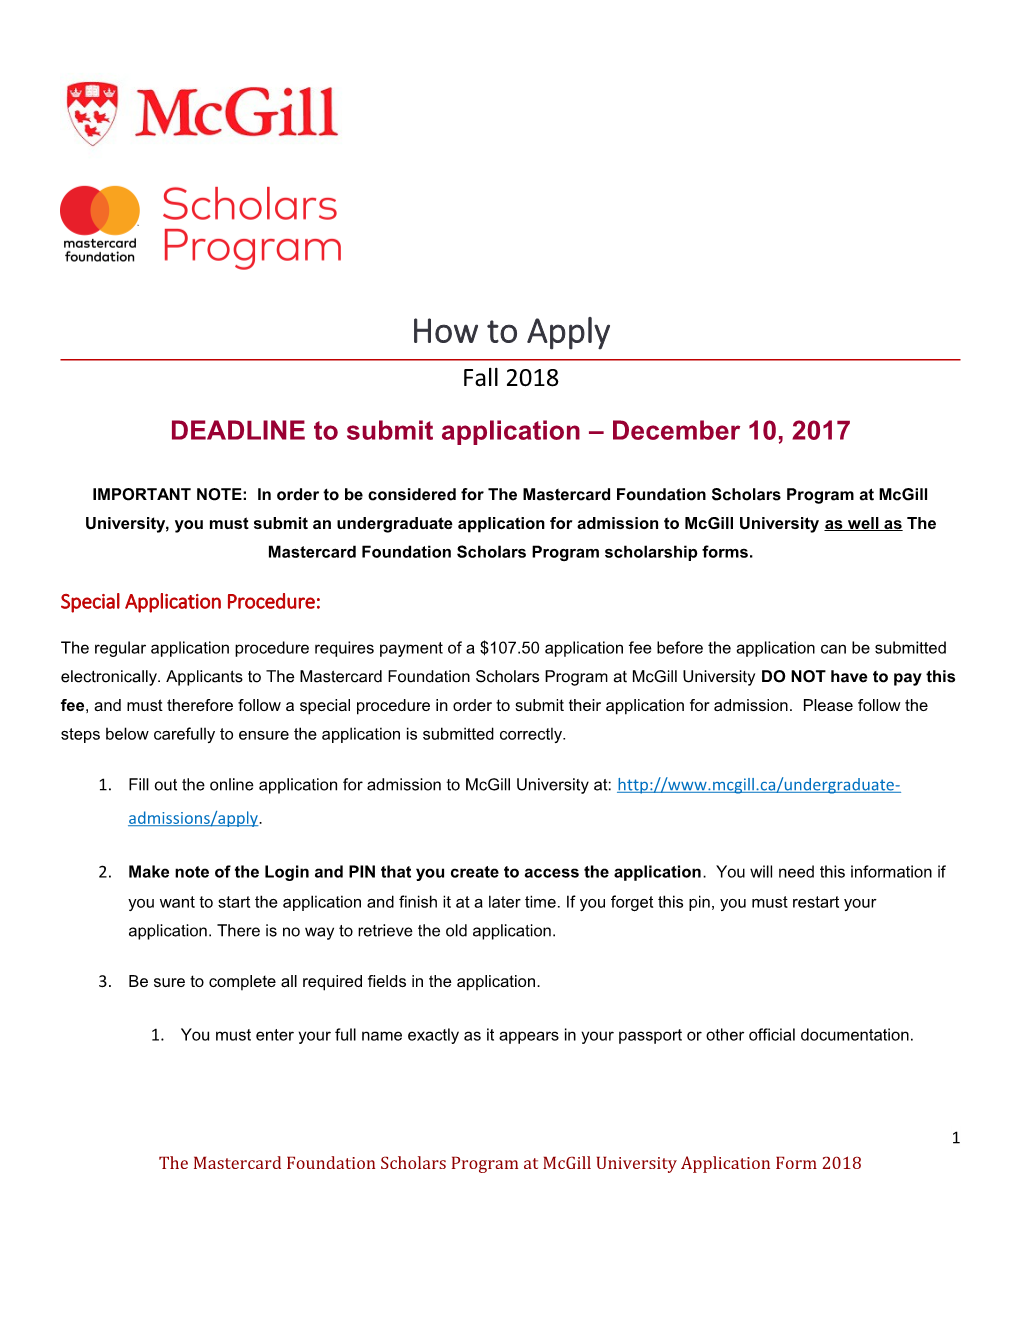 DEADLINE to Submit Application December 10, 2017